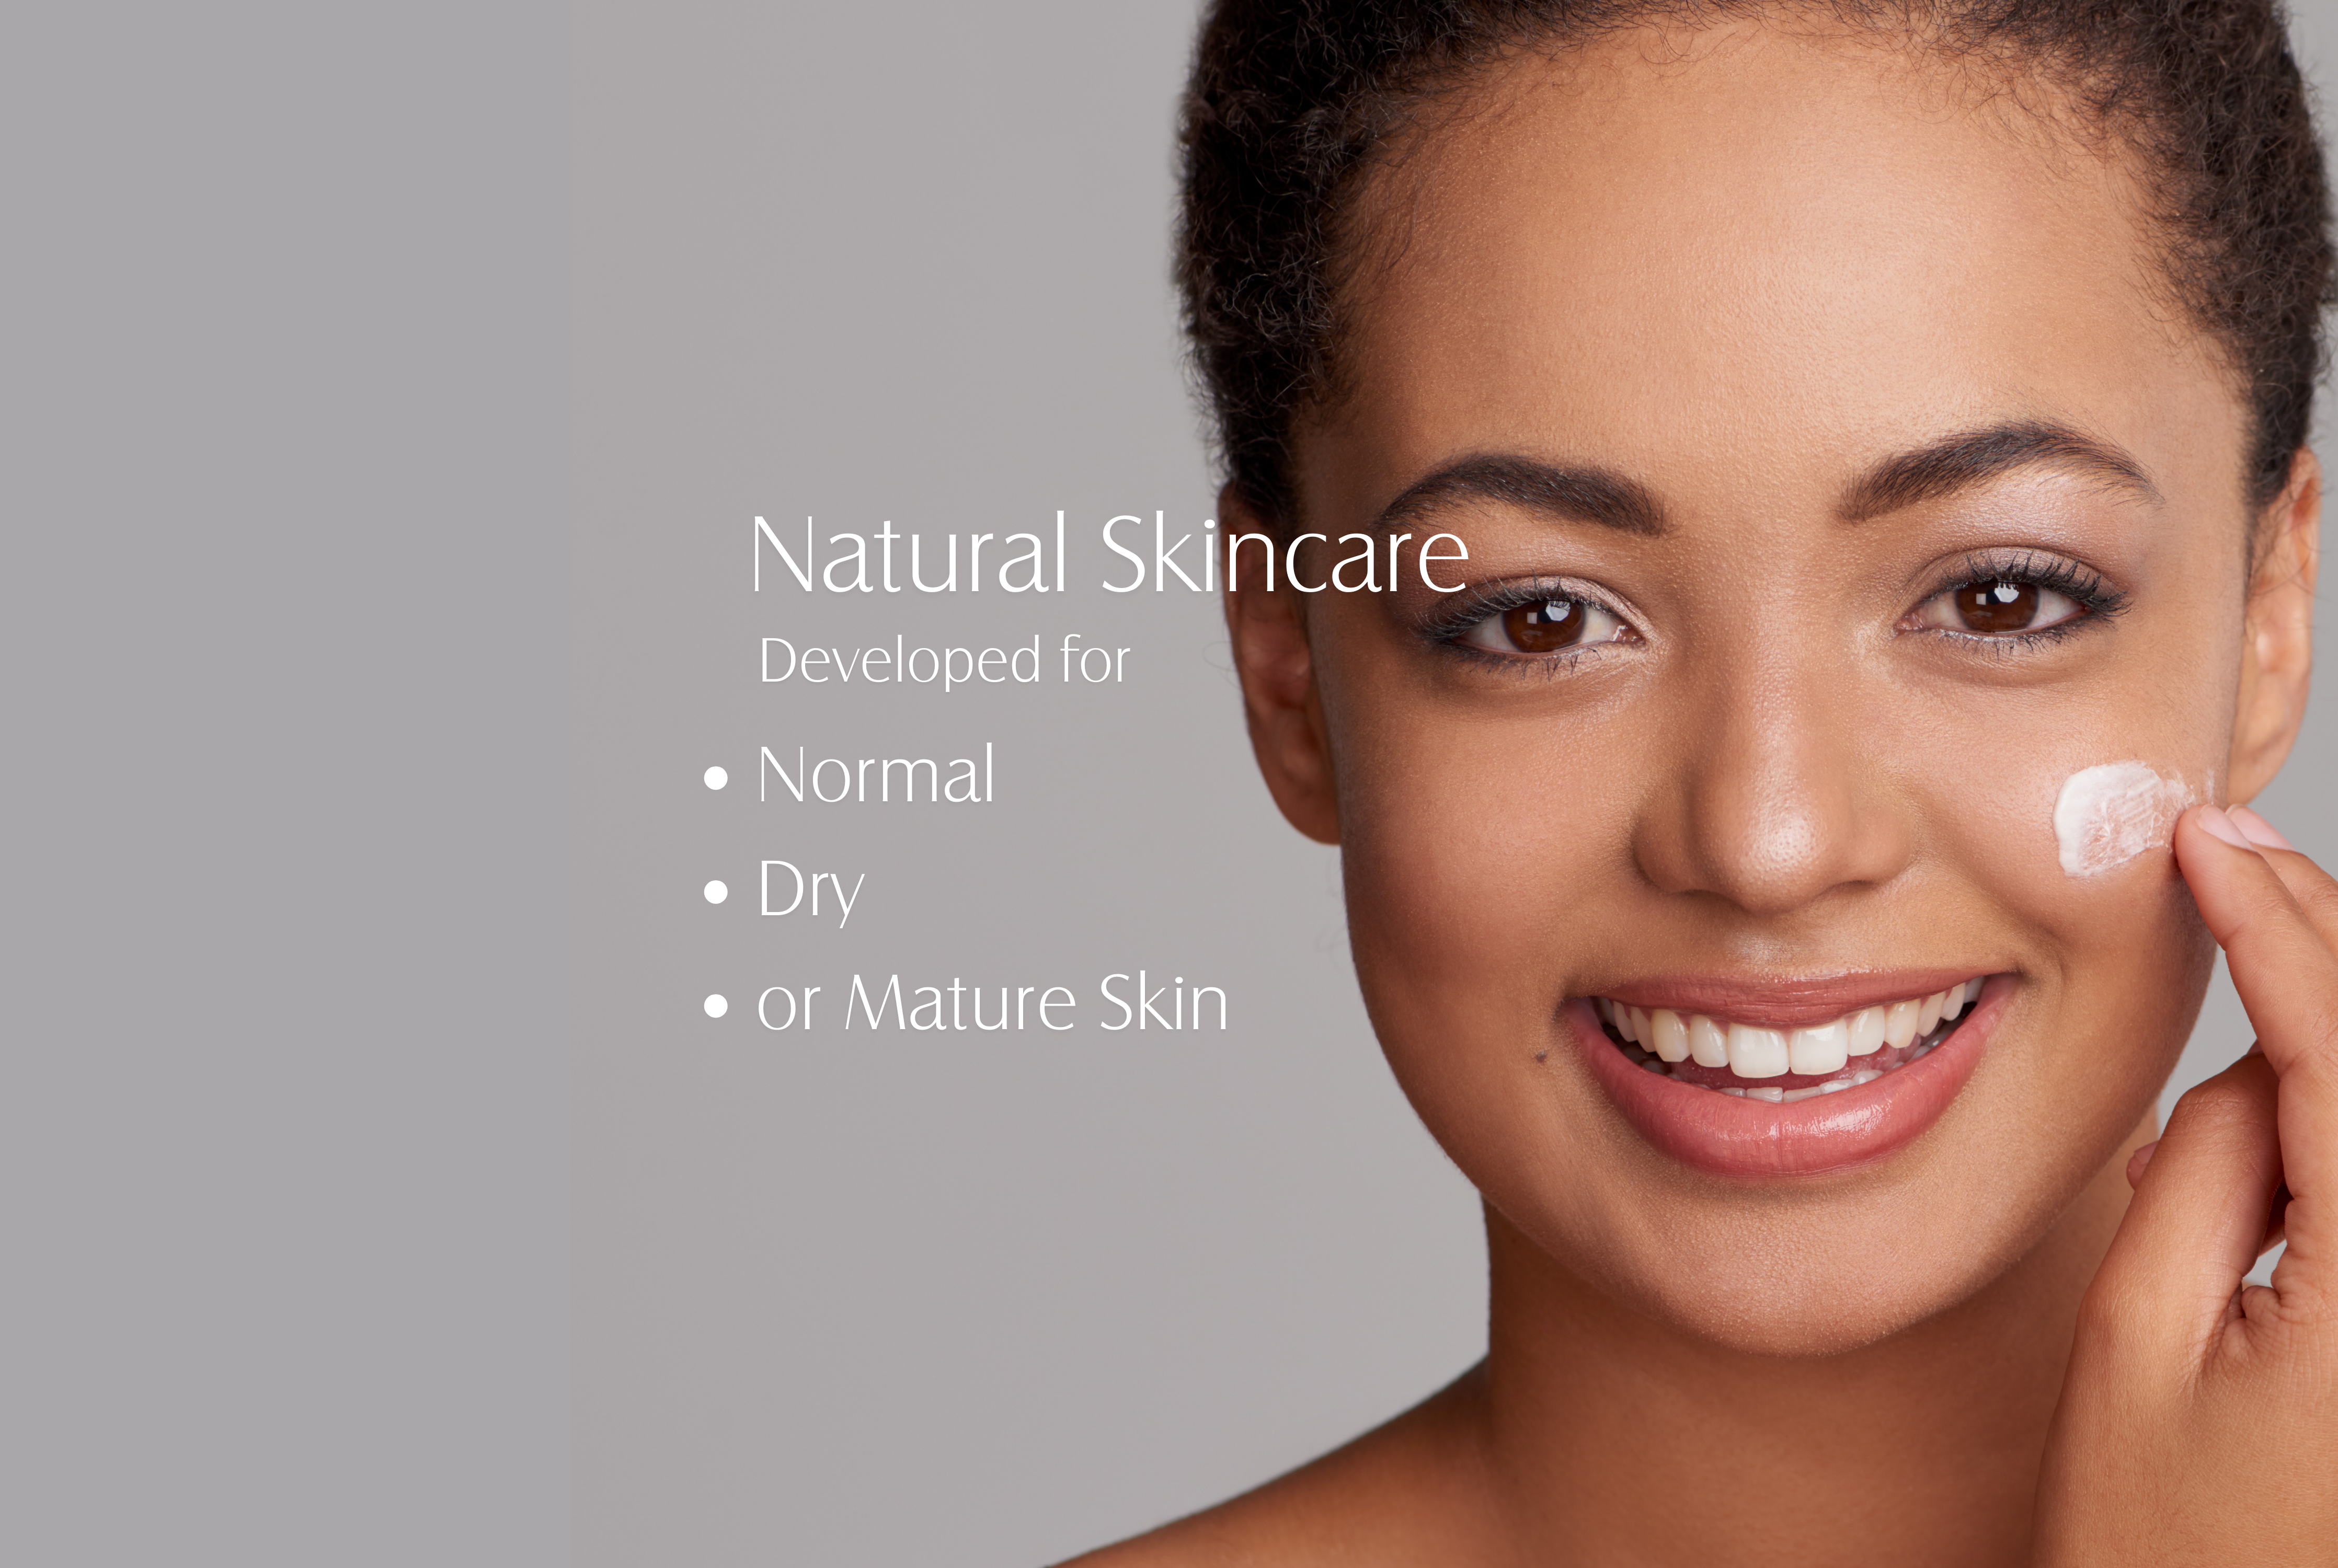 Normal to Dry or Mature Skin